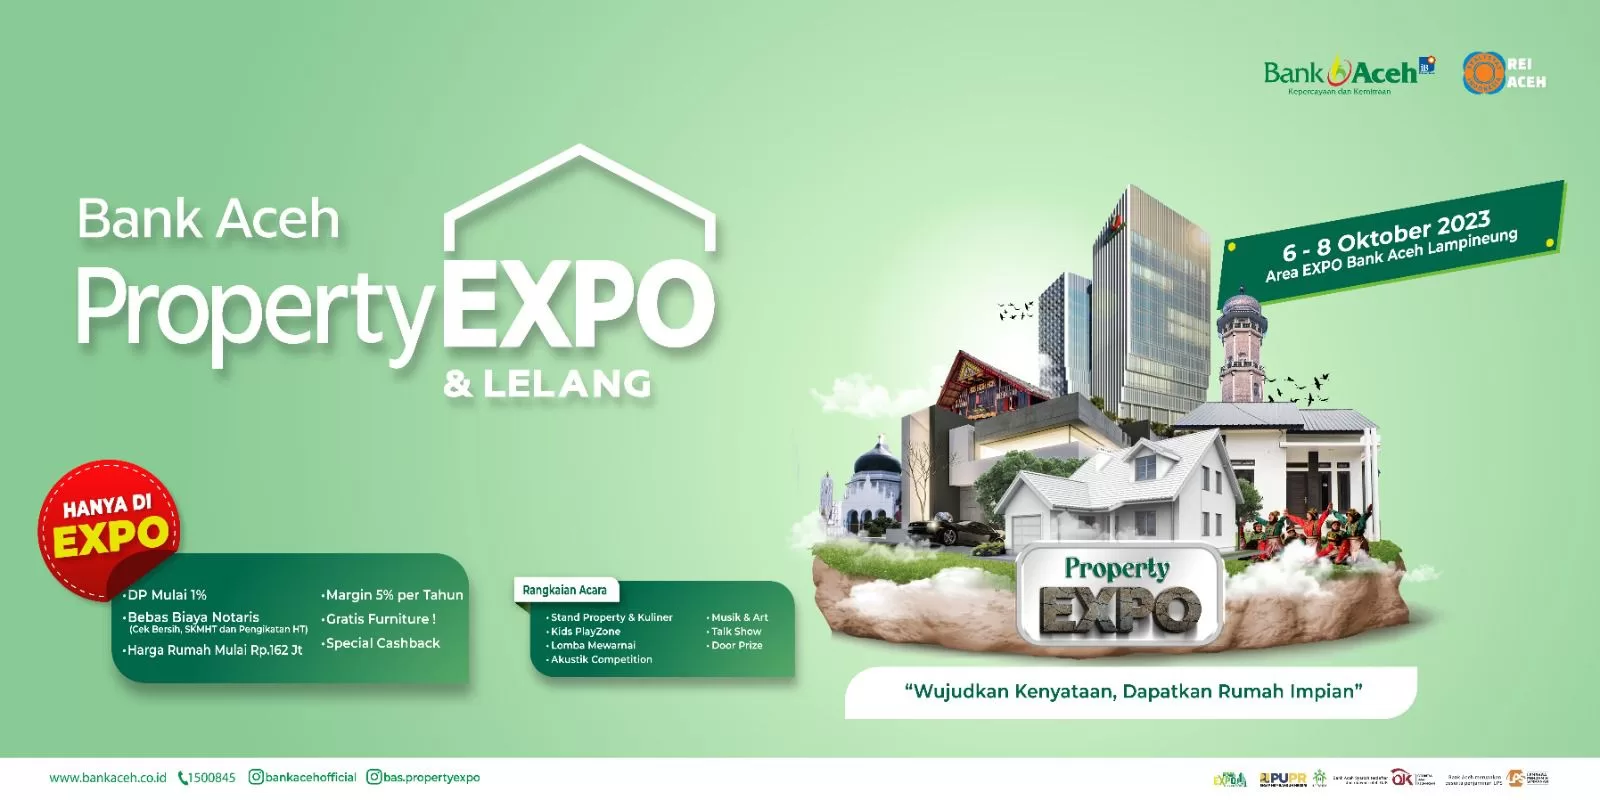 Bank Aceh Property Expo